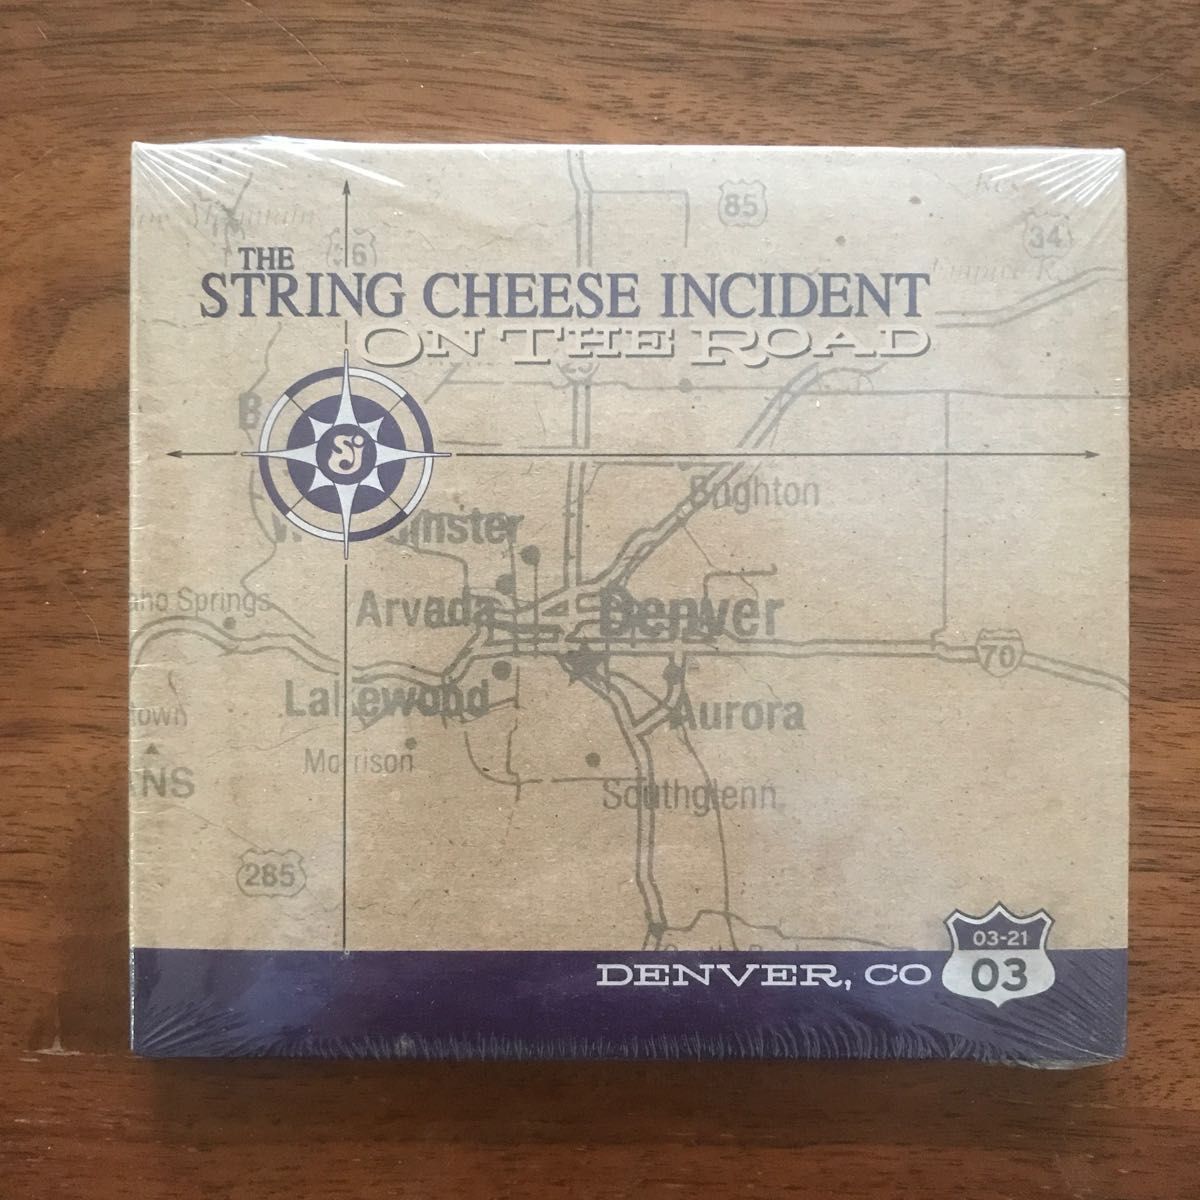 [CD] the string cheese incident on the road ライブ3CD ２点セット 未開封